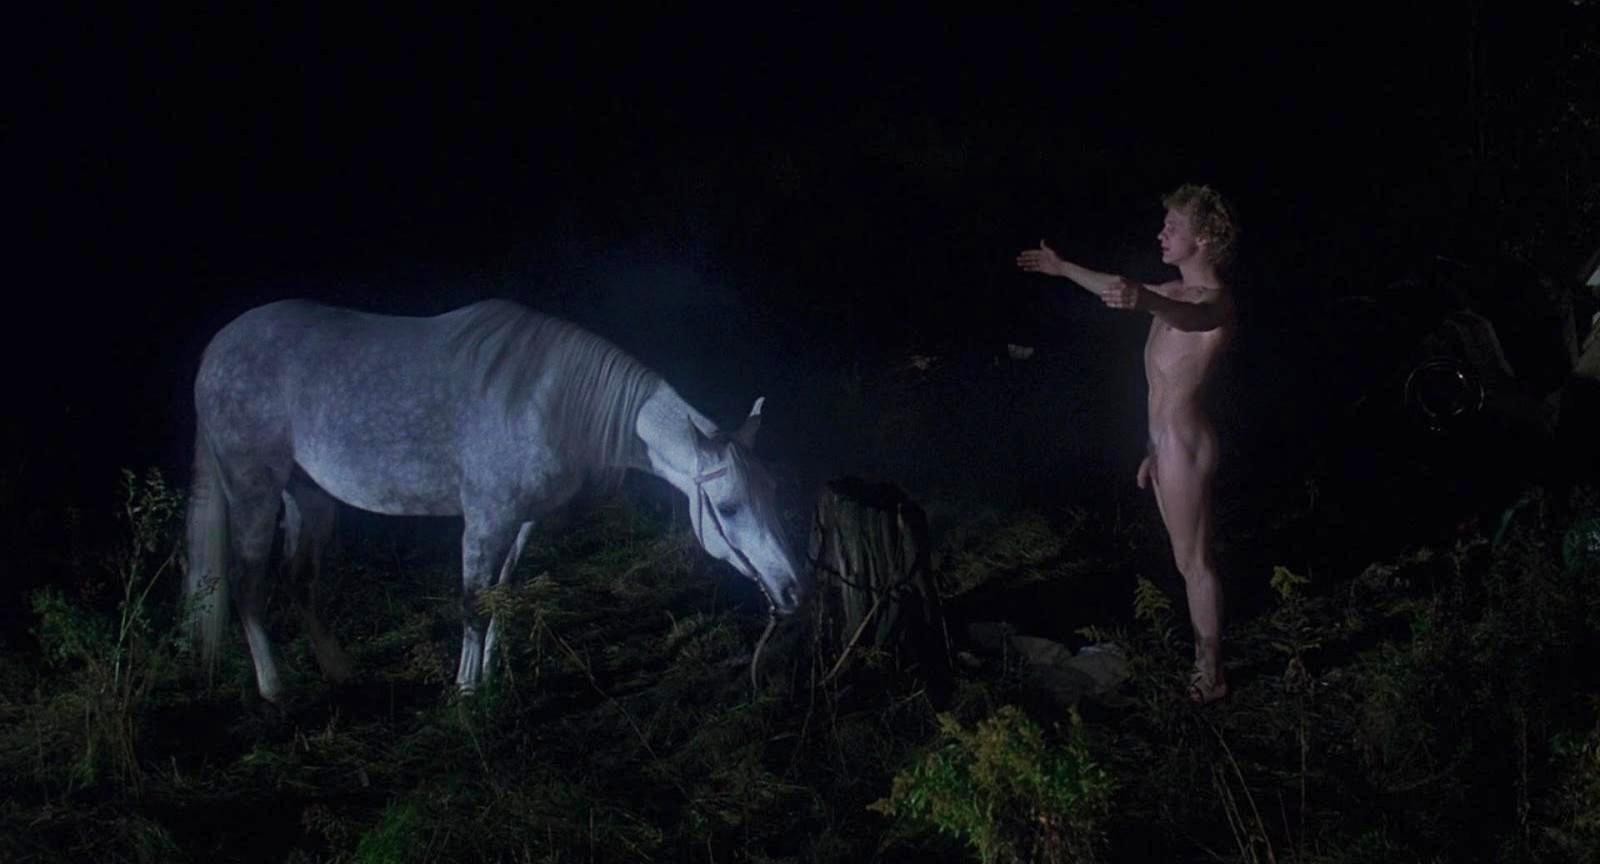 Peter Firth nudo in "Equus" (1977) .